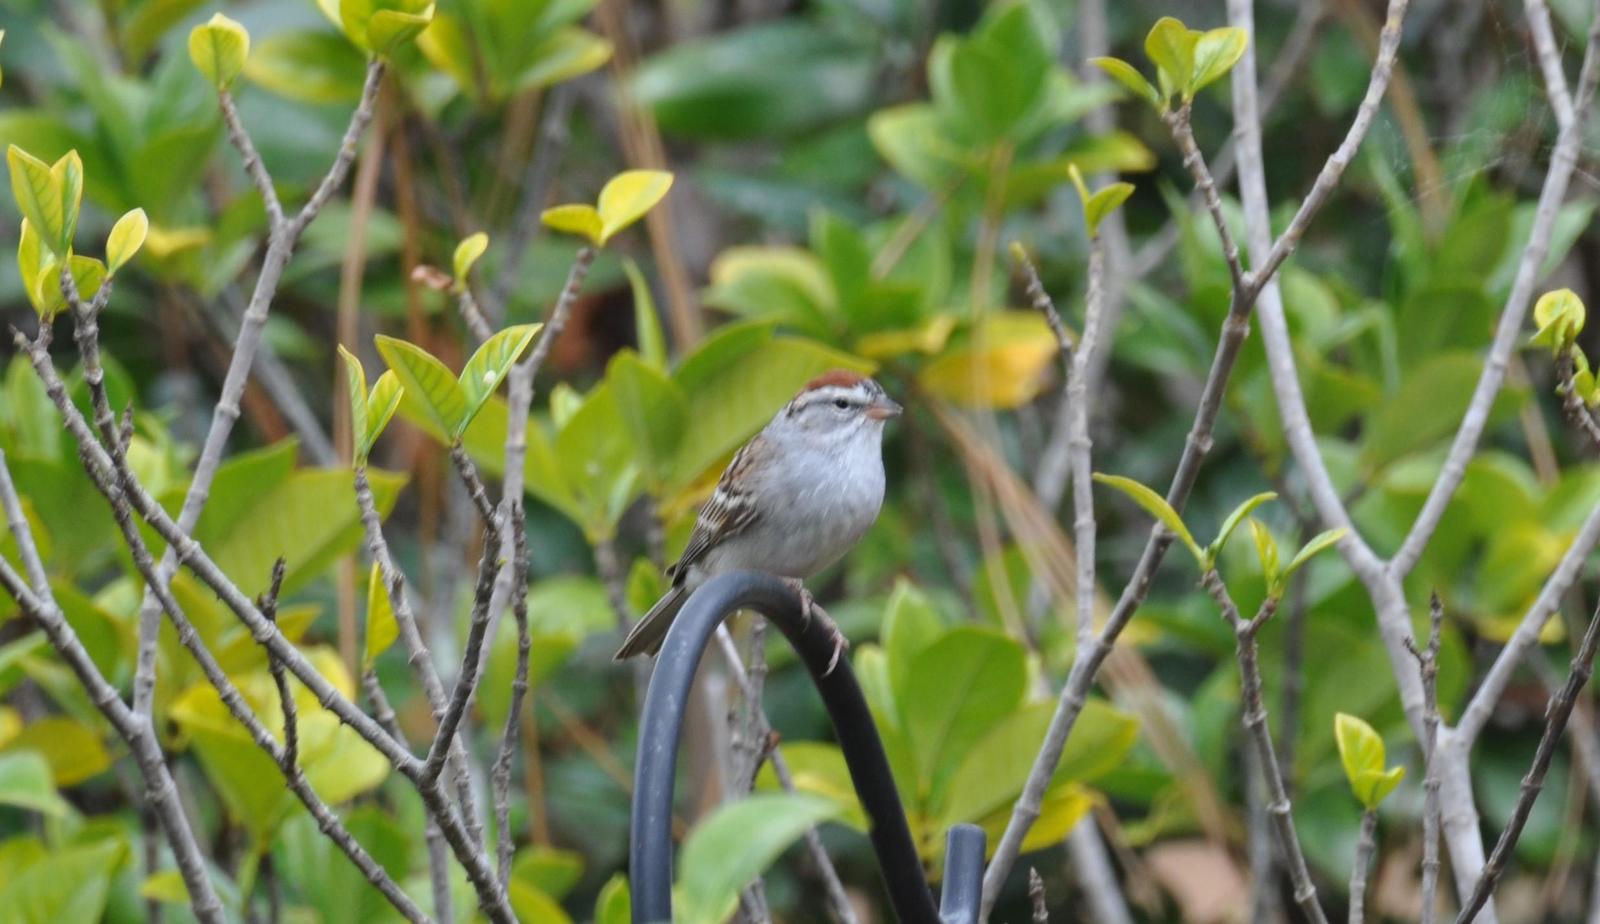 Chipping Sparrow Photo by Ashley Grubstein